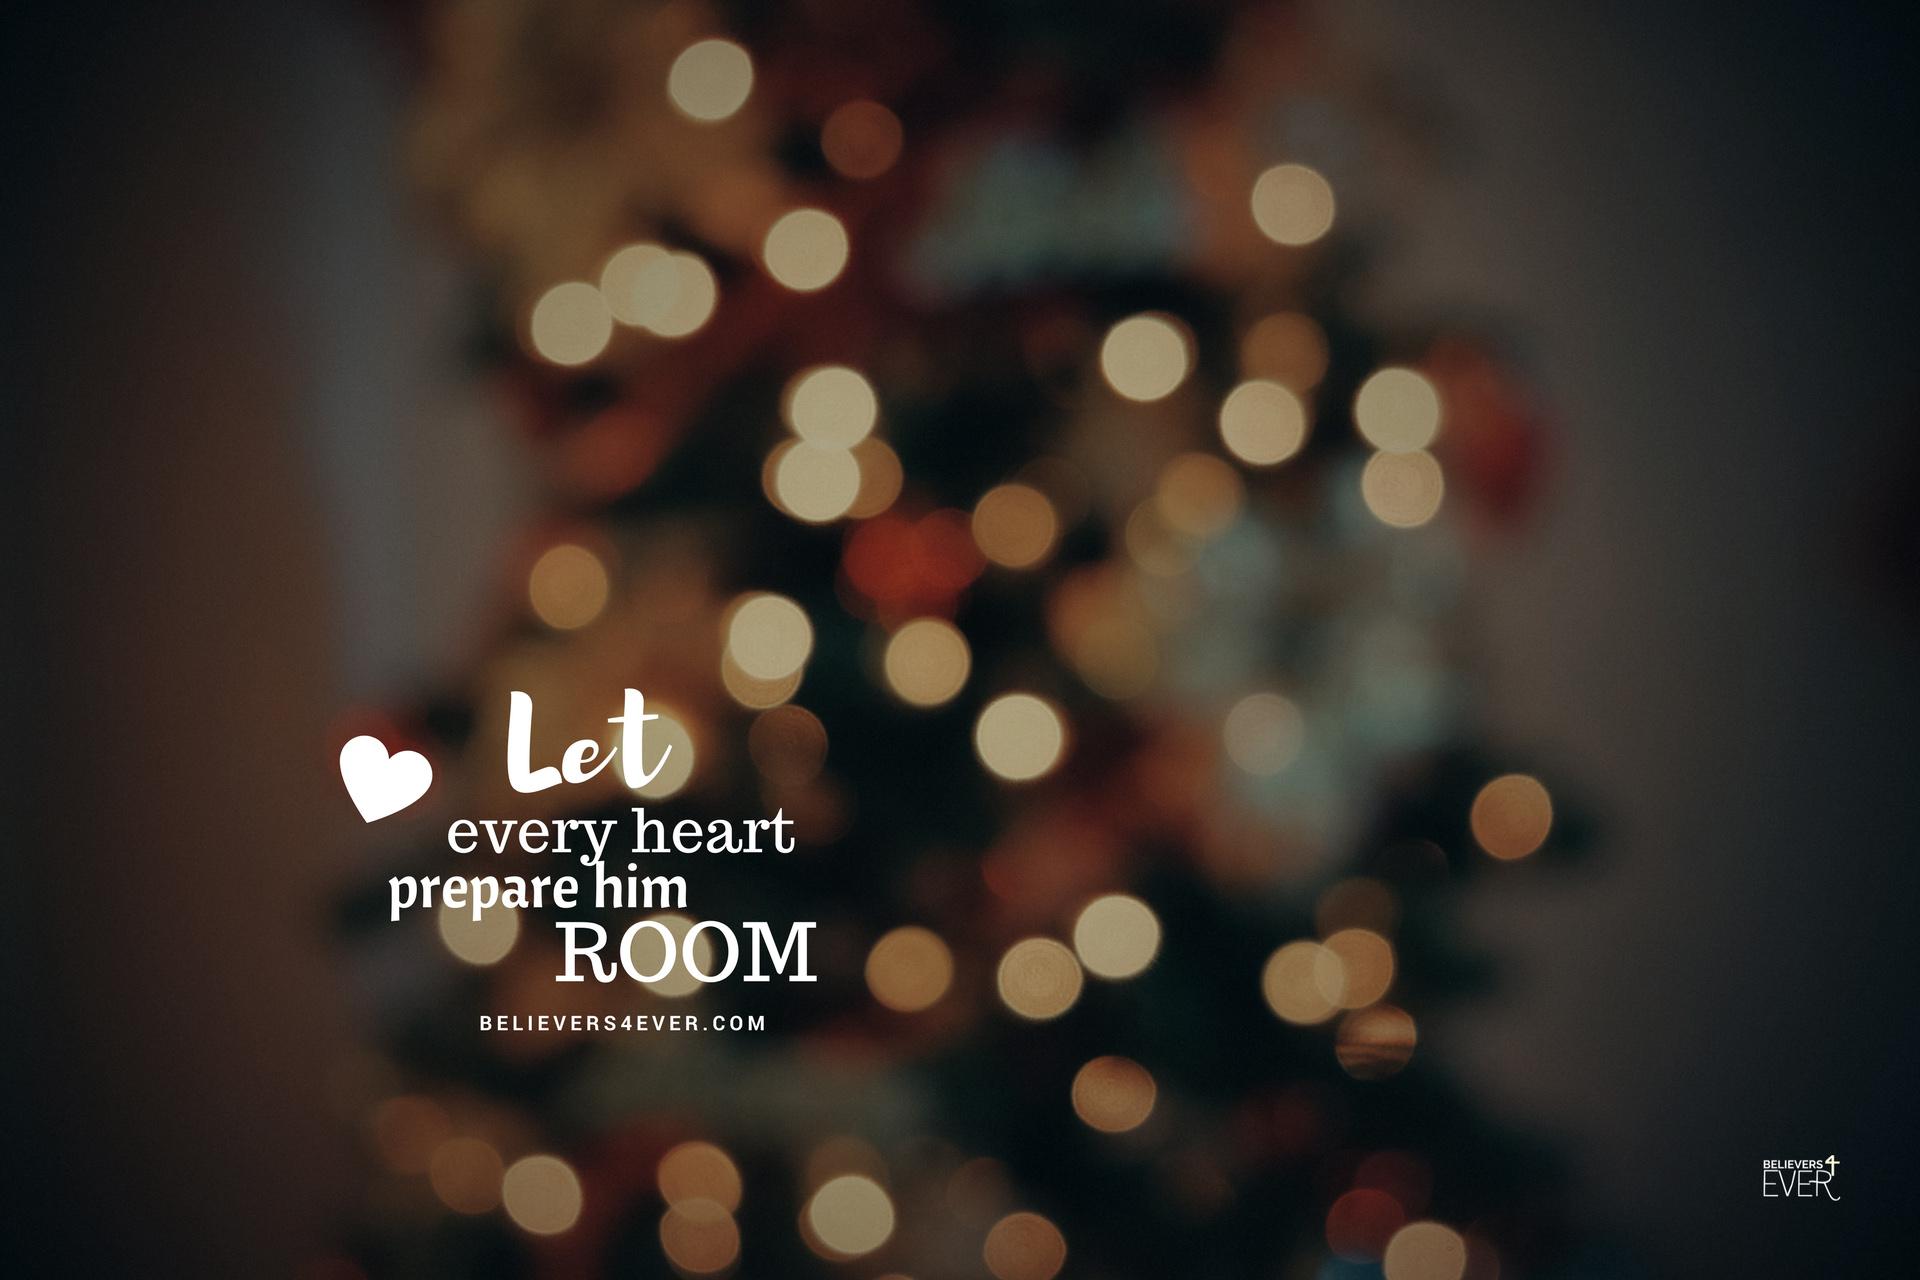 Let every heart prepare him room